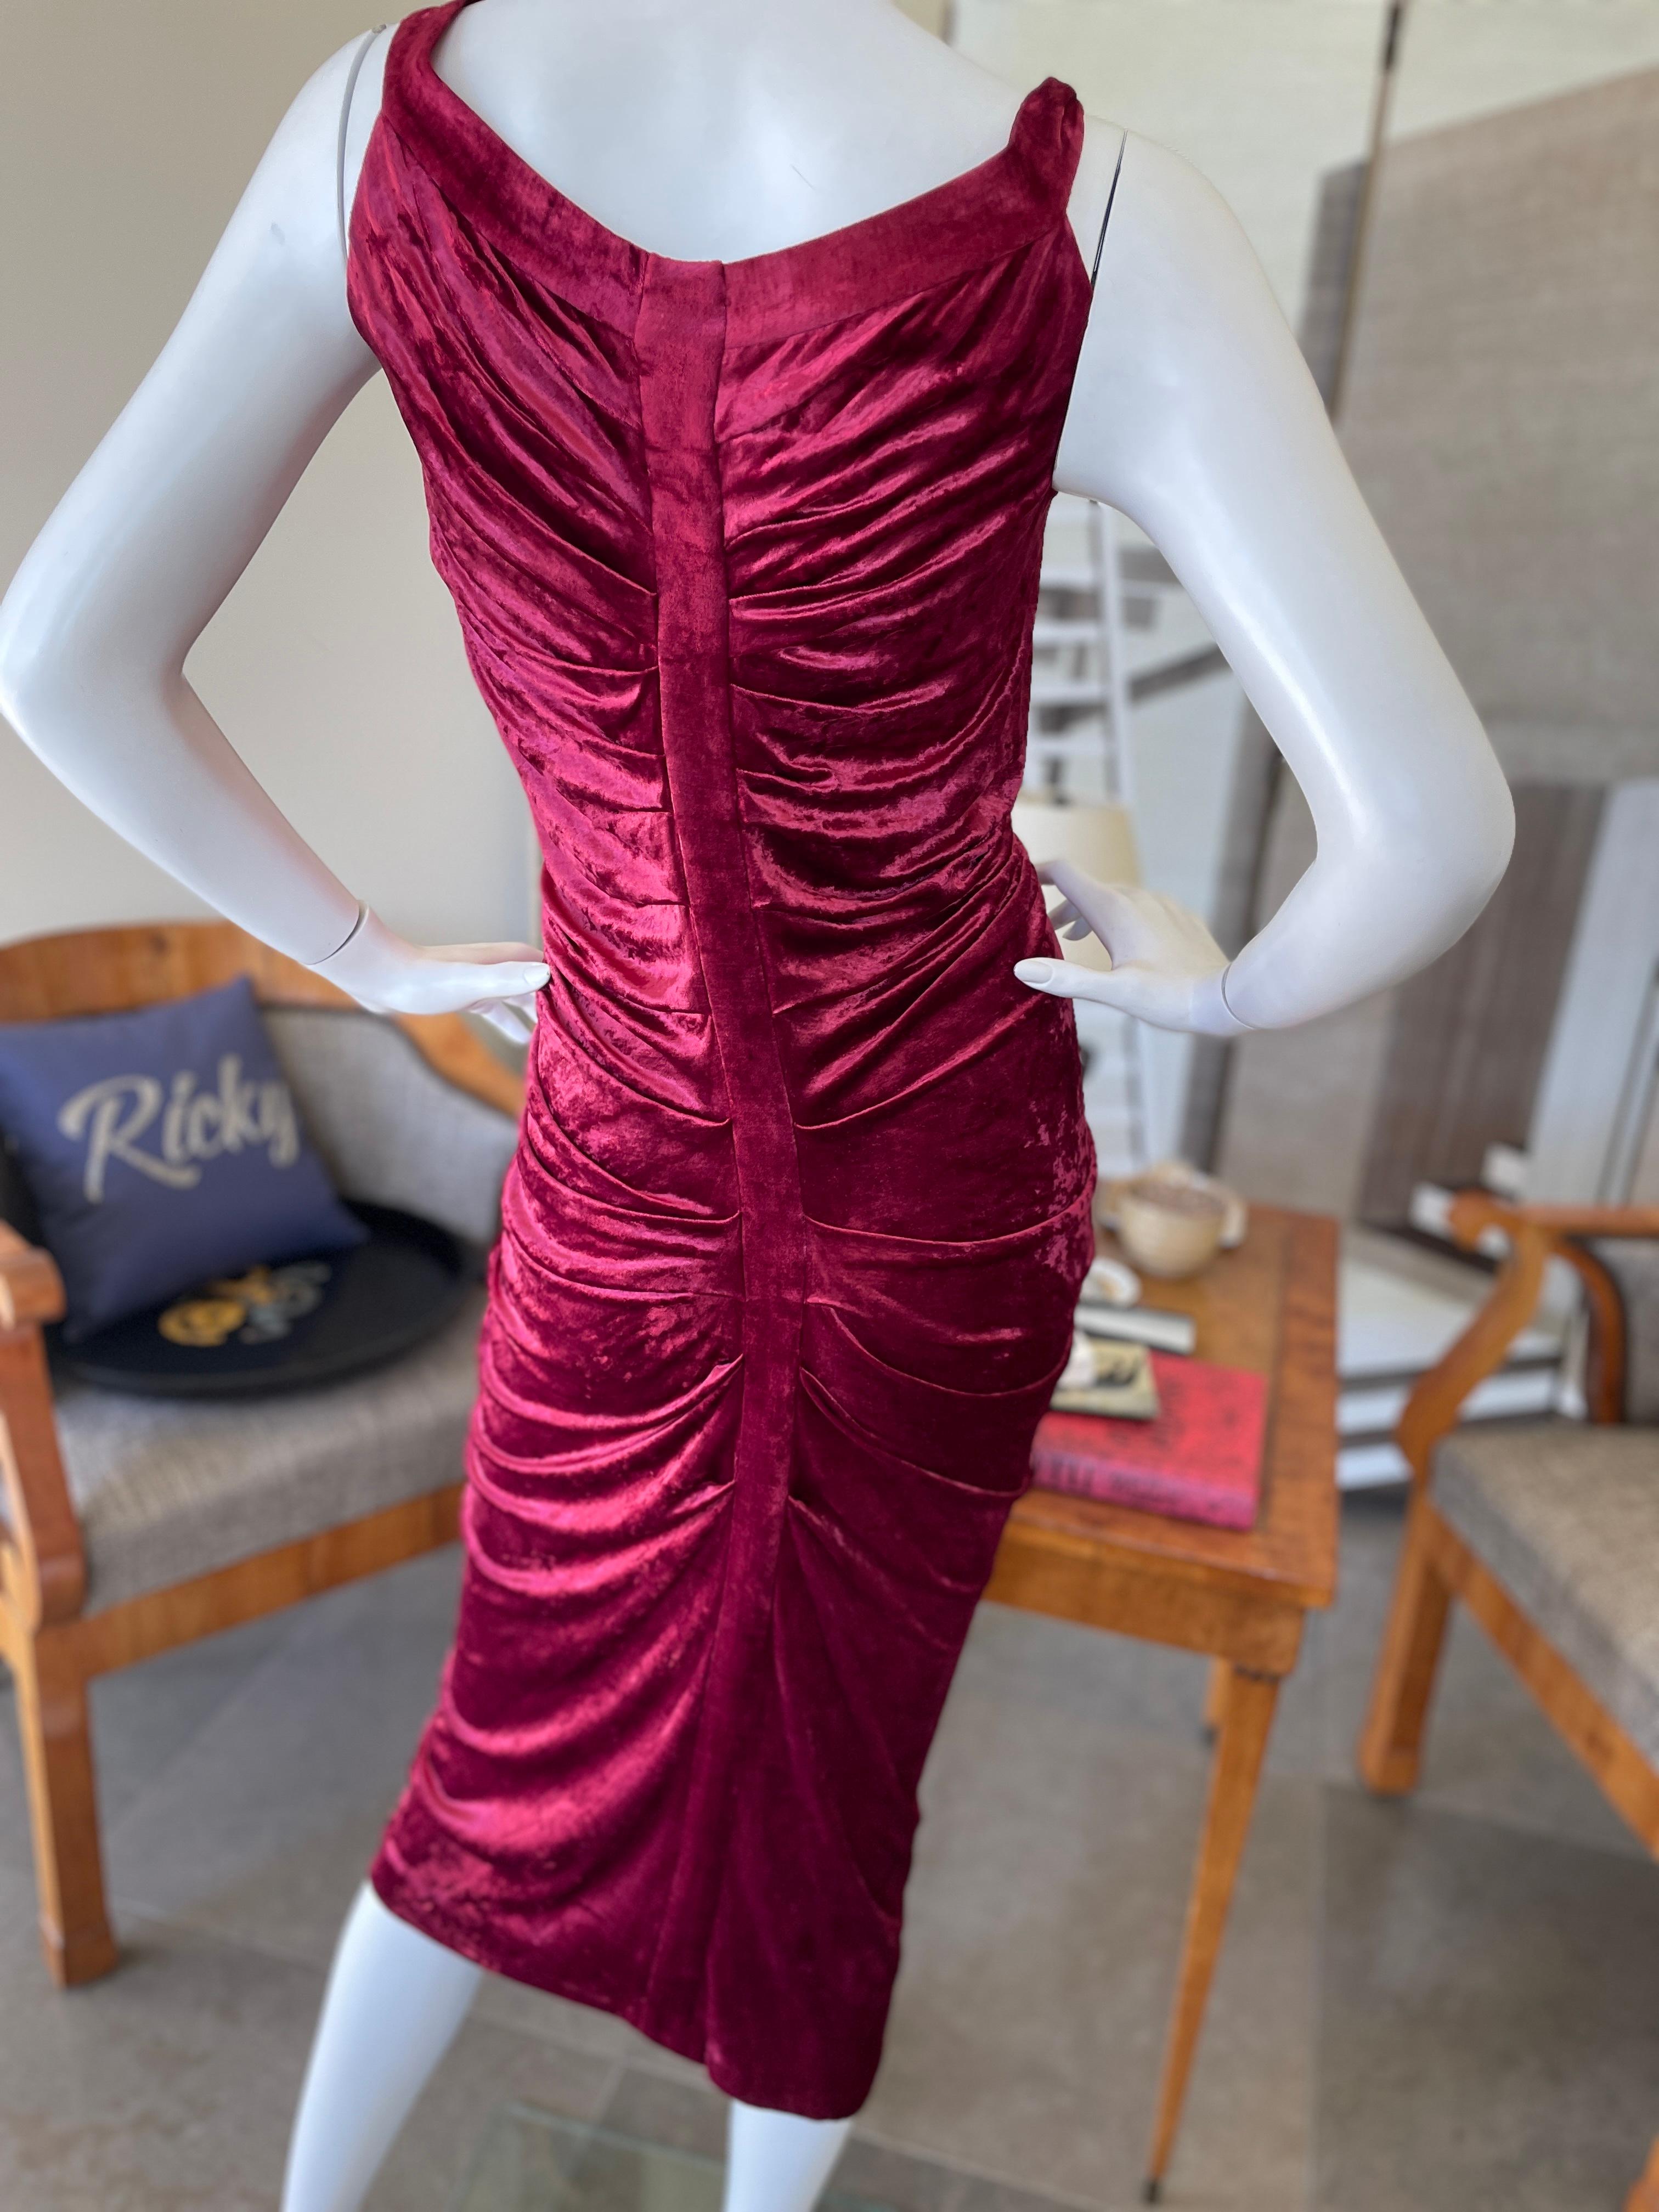 Women's John Galliano Vintage Red Velvet Ruched Cocktail Dress w Matching Feather Shrug For Sale